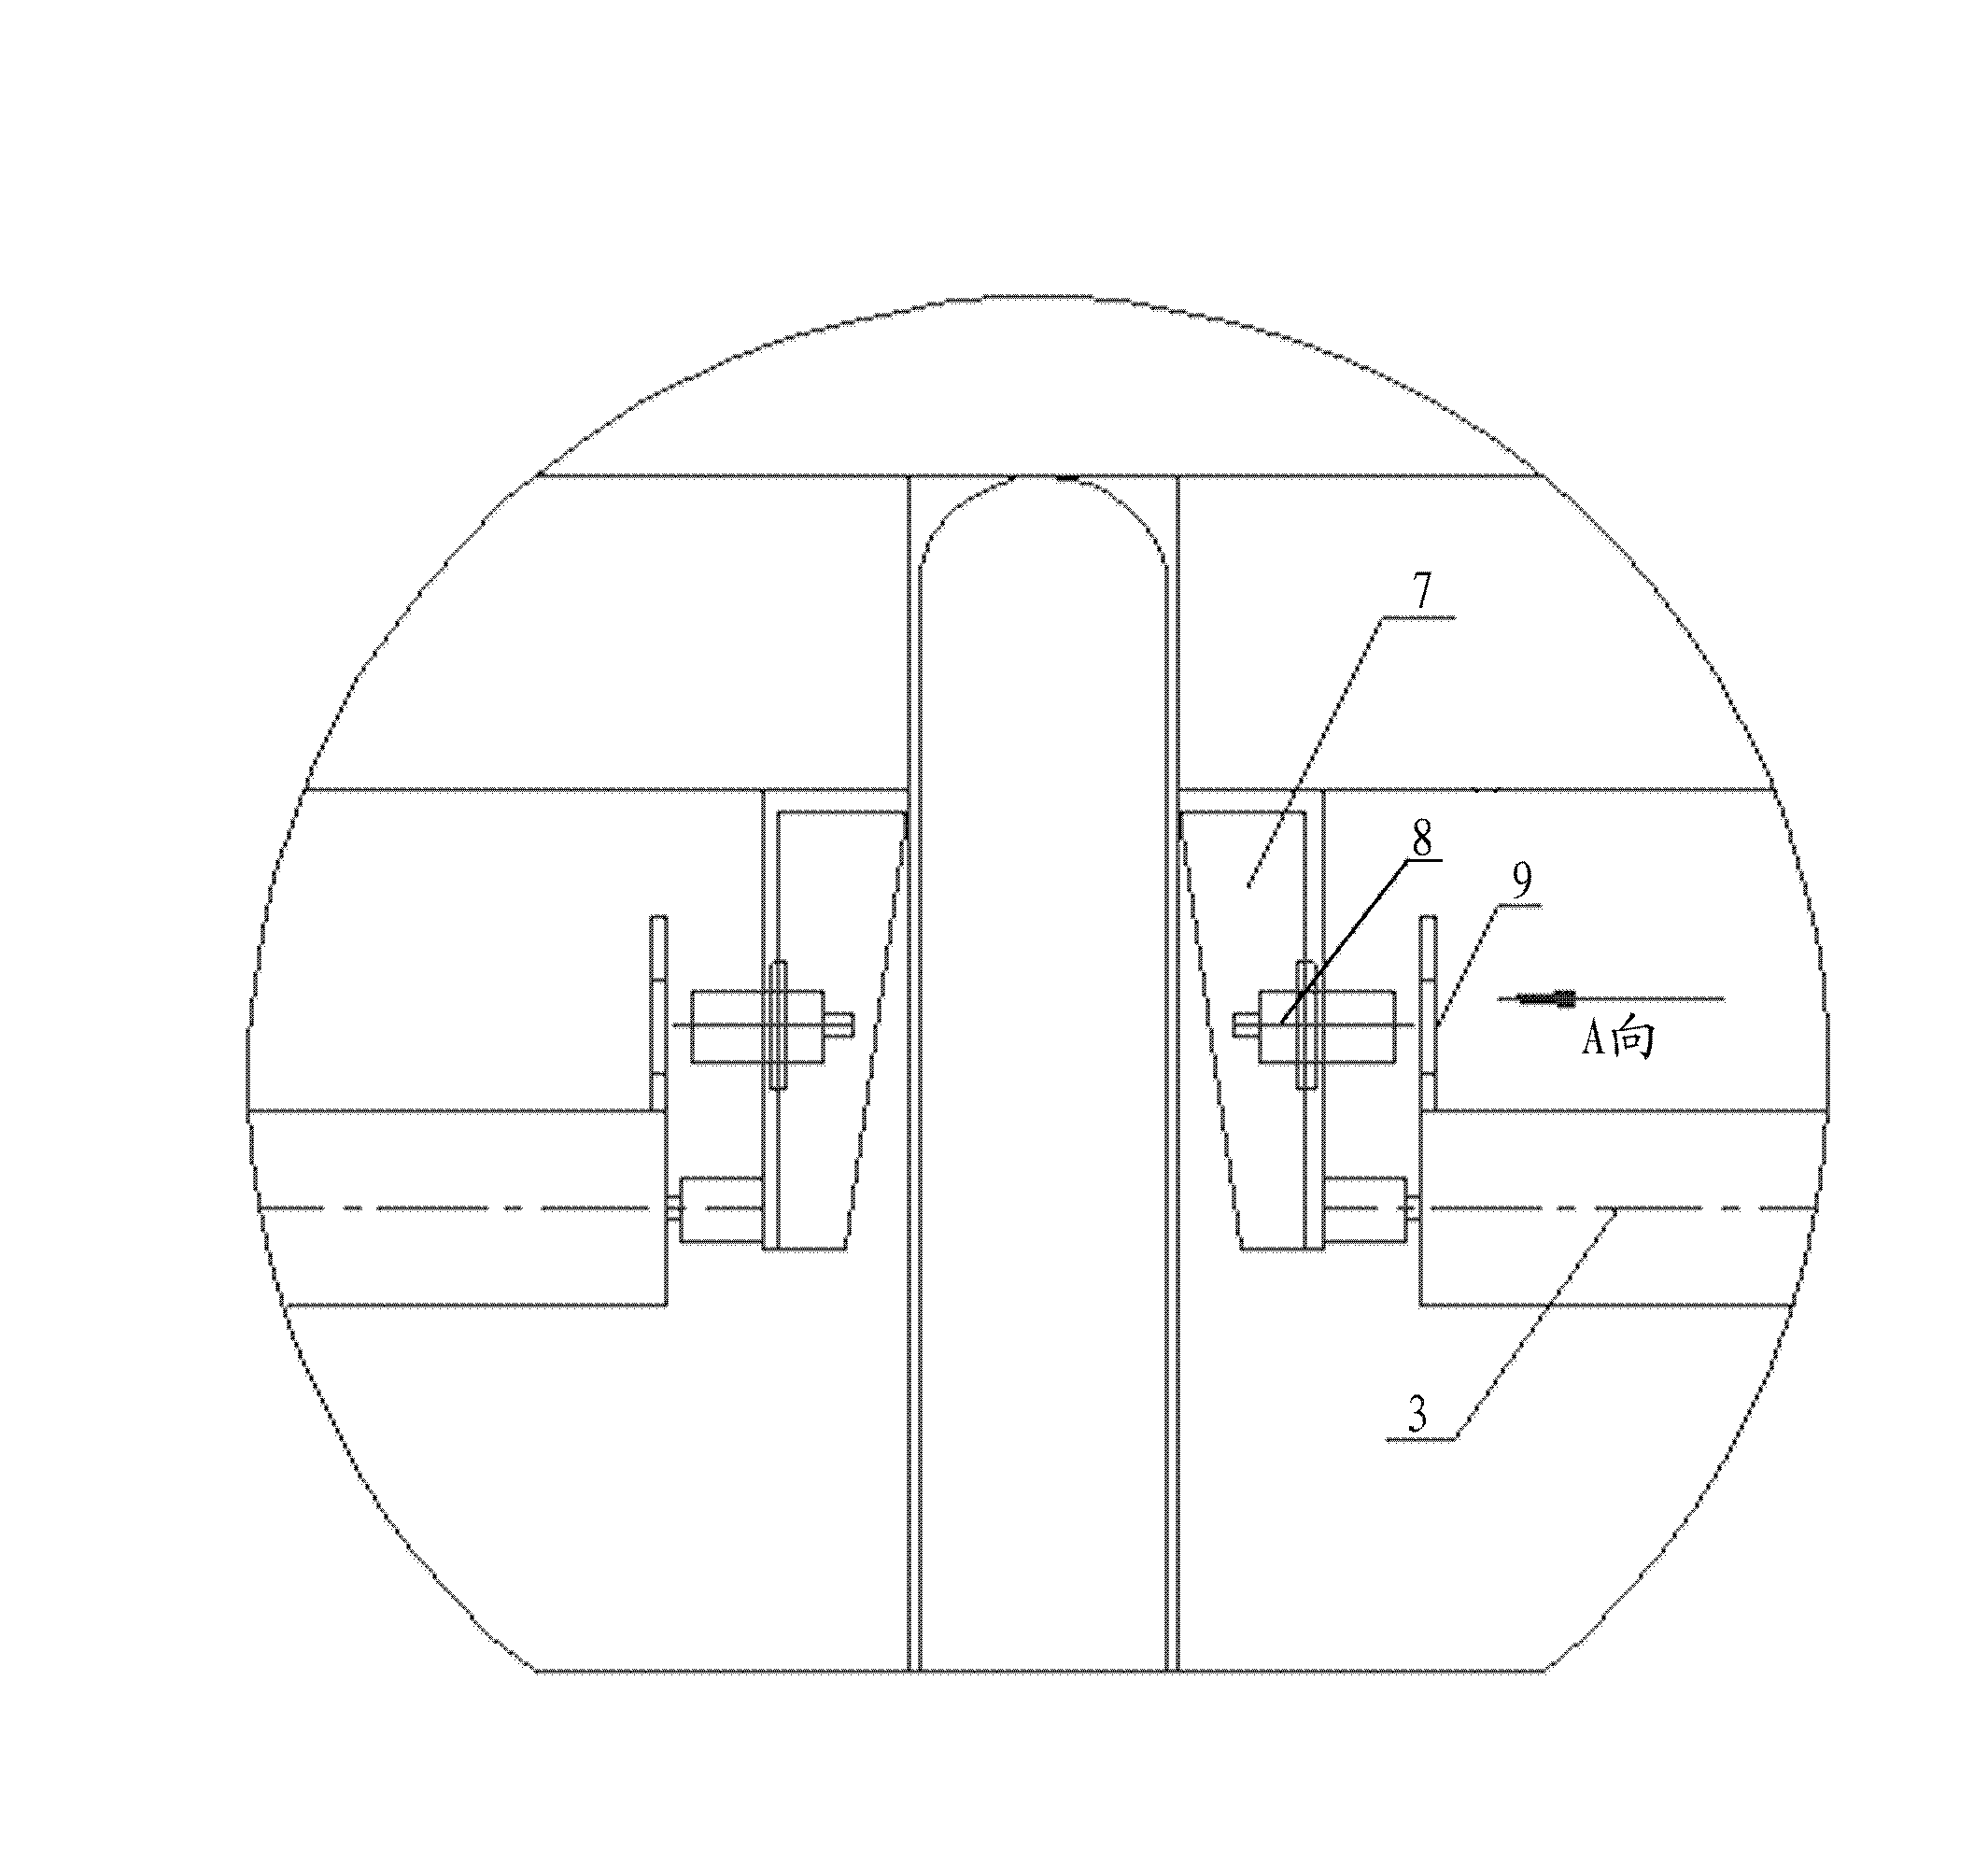 Scraper conveyor fault detection device, system and method